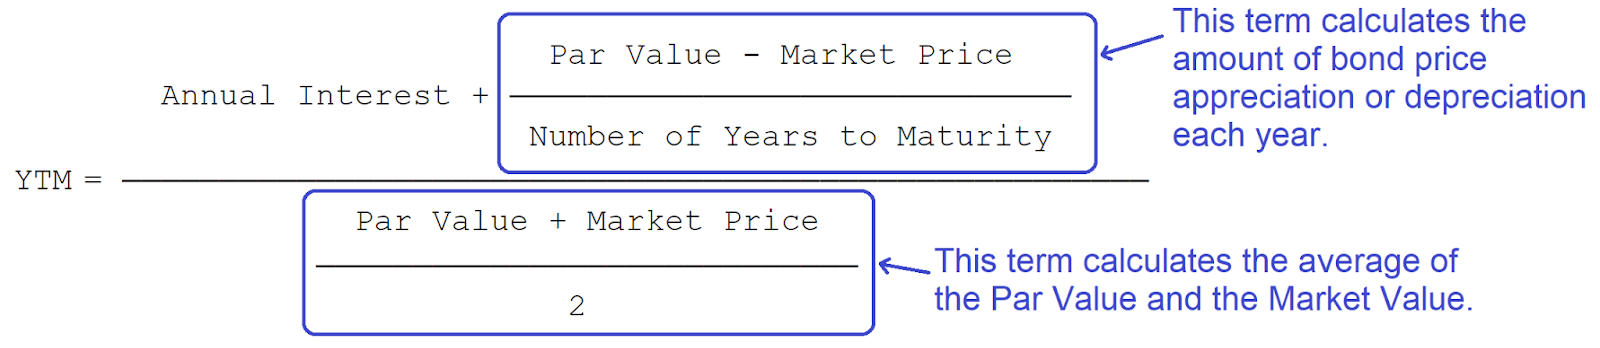 Detailed analysis of the Yield to Maturity formula